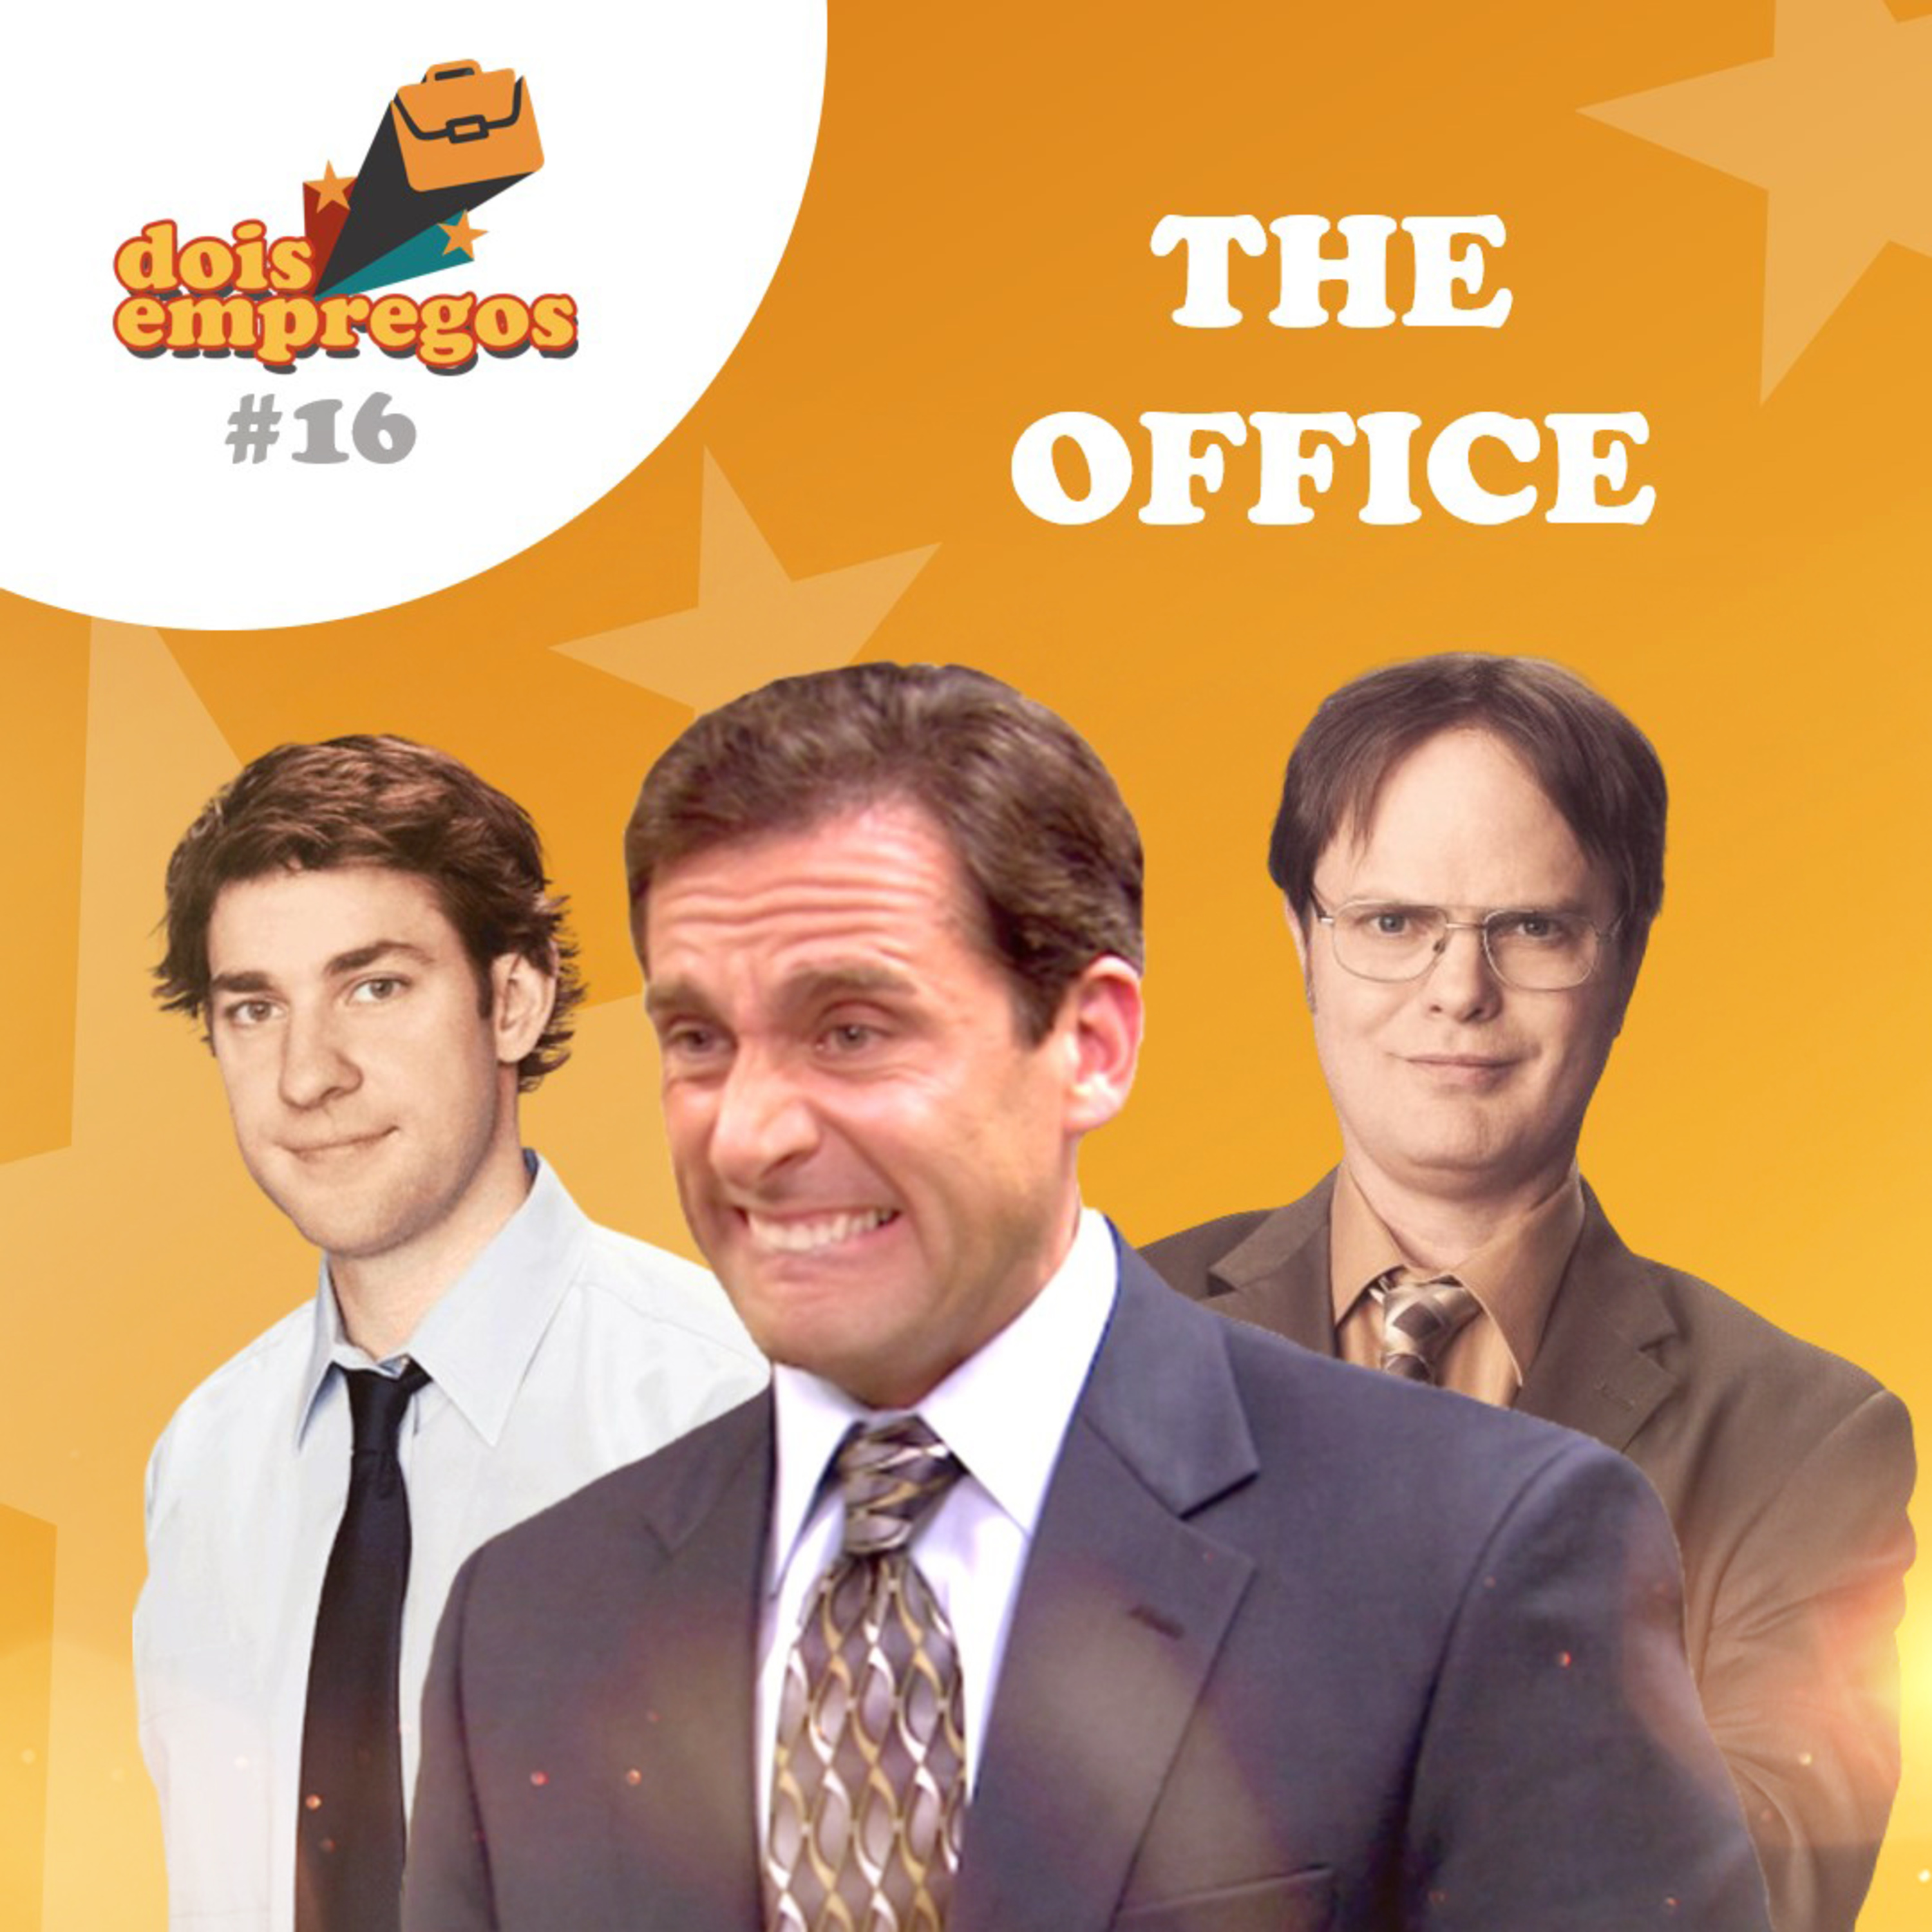 #16 - THE OFFICE